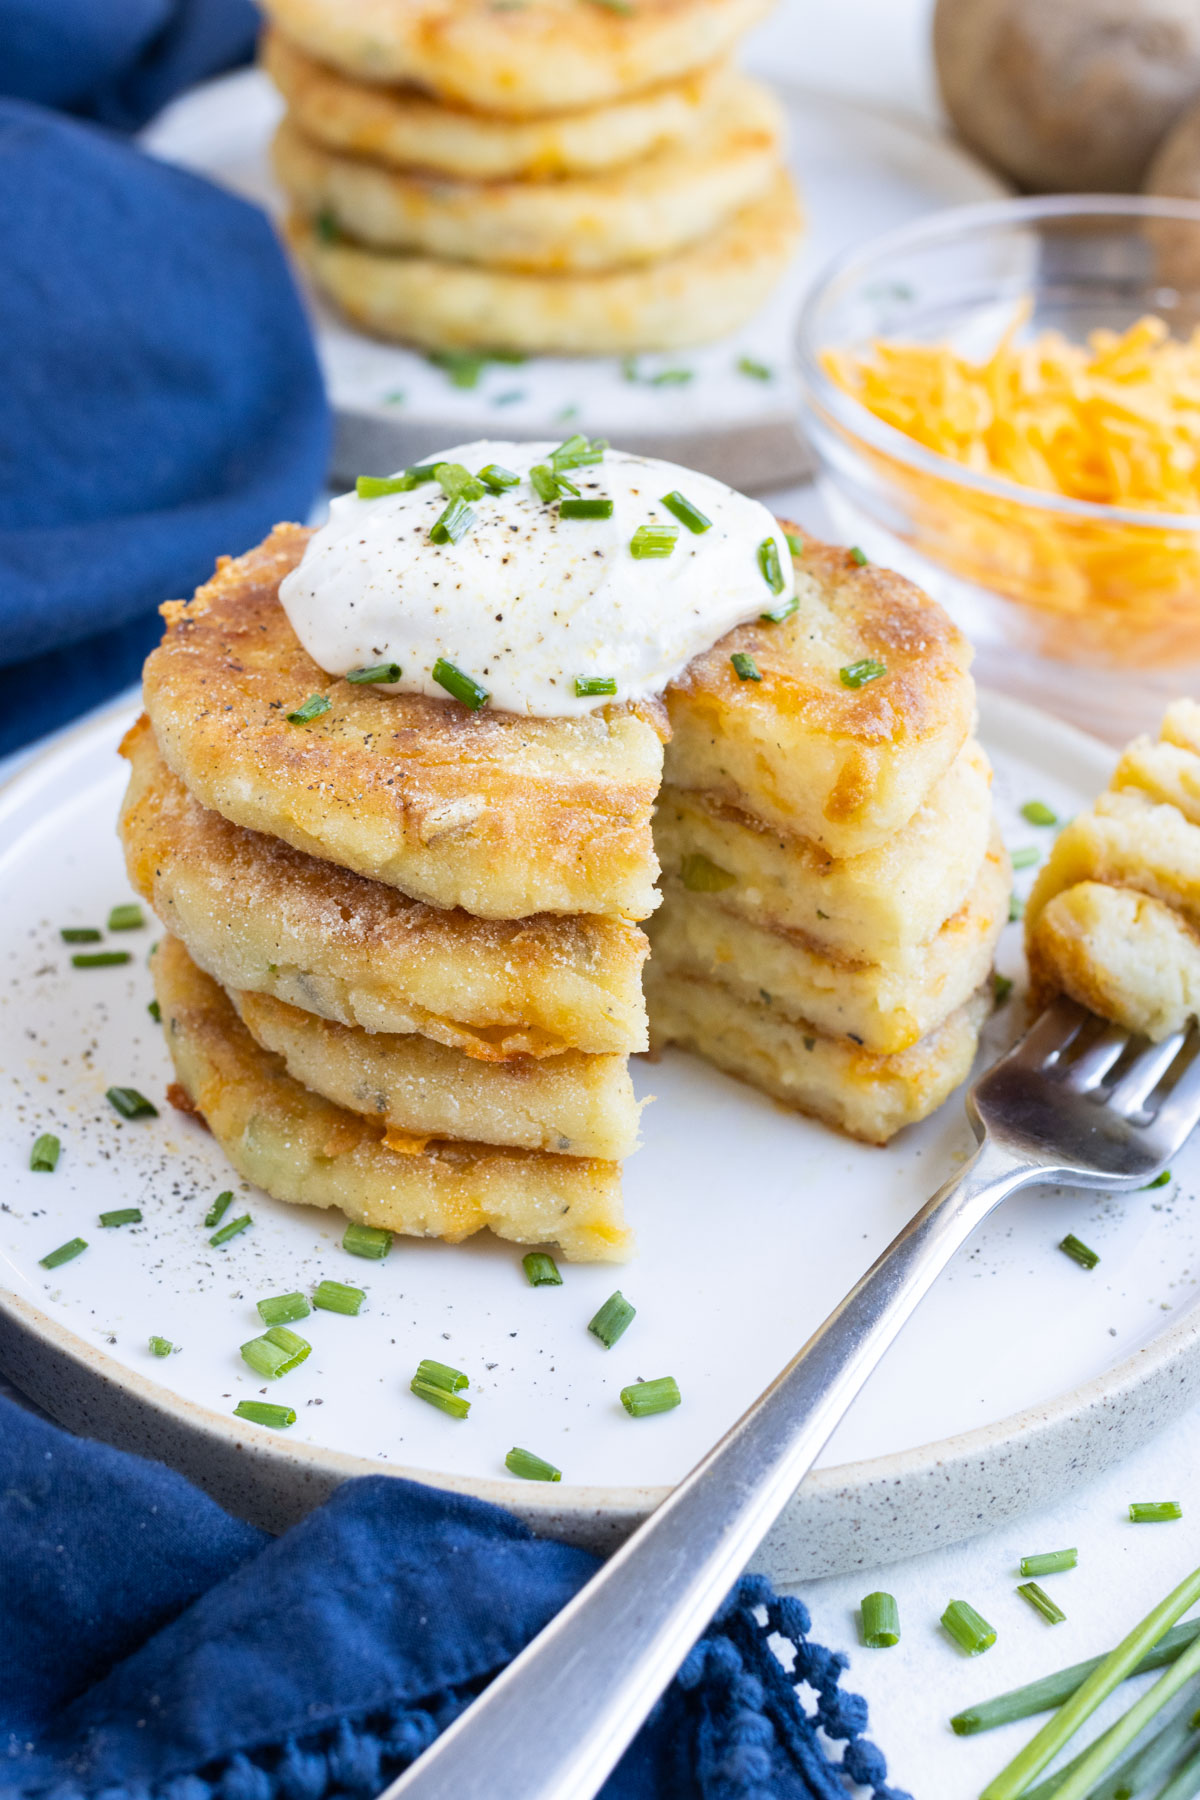 Mashed Potato Pancakes are easy and delicious.